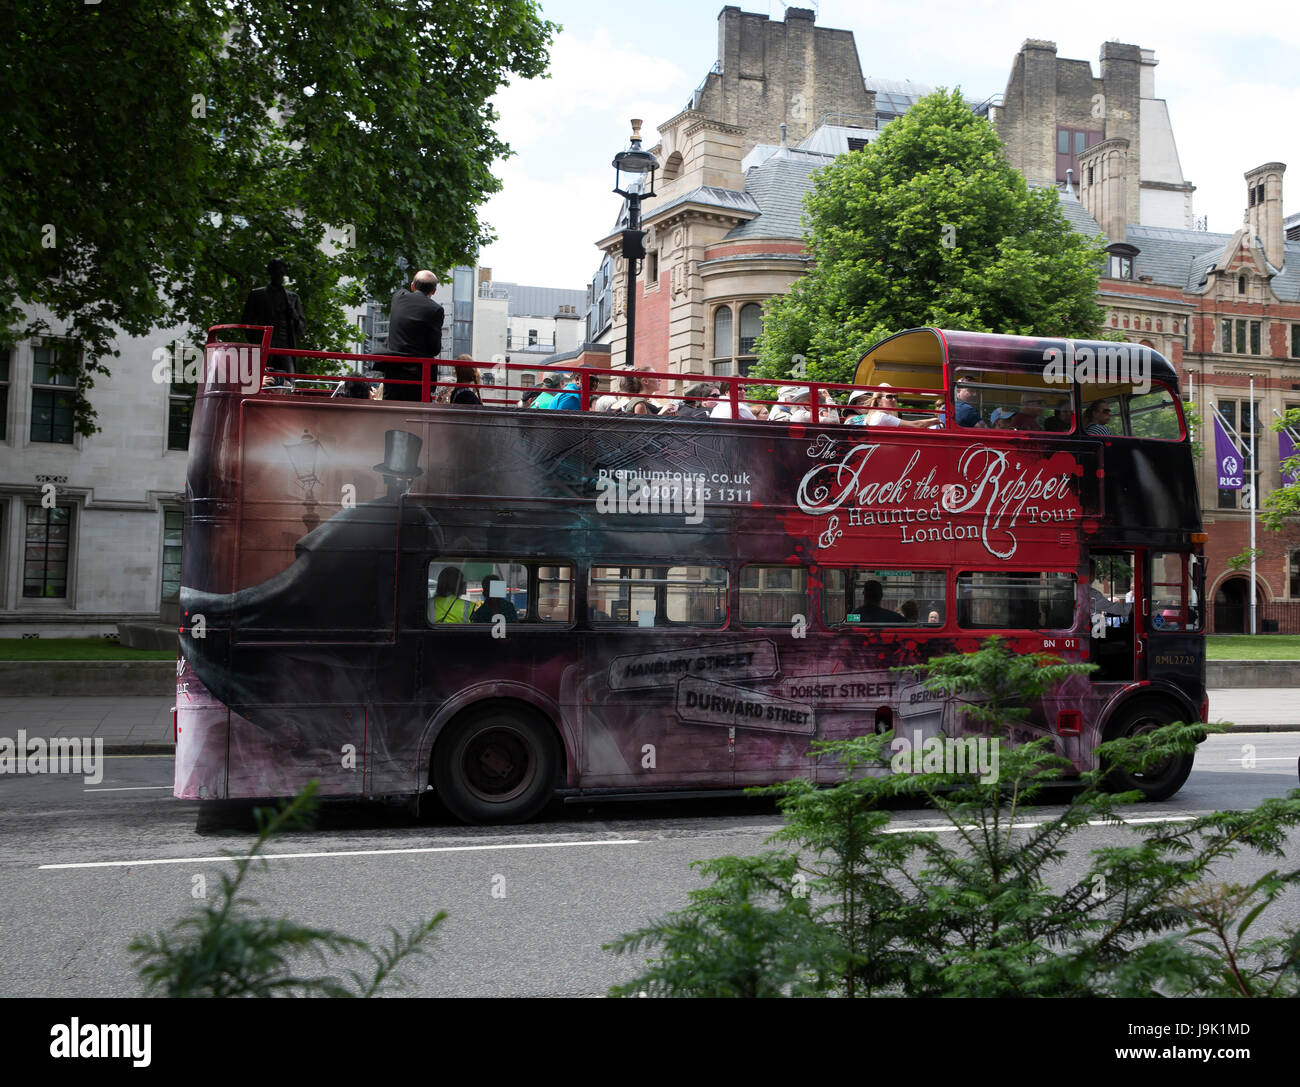 Jack The Ripper London tour Bus in London Stock Photo